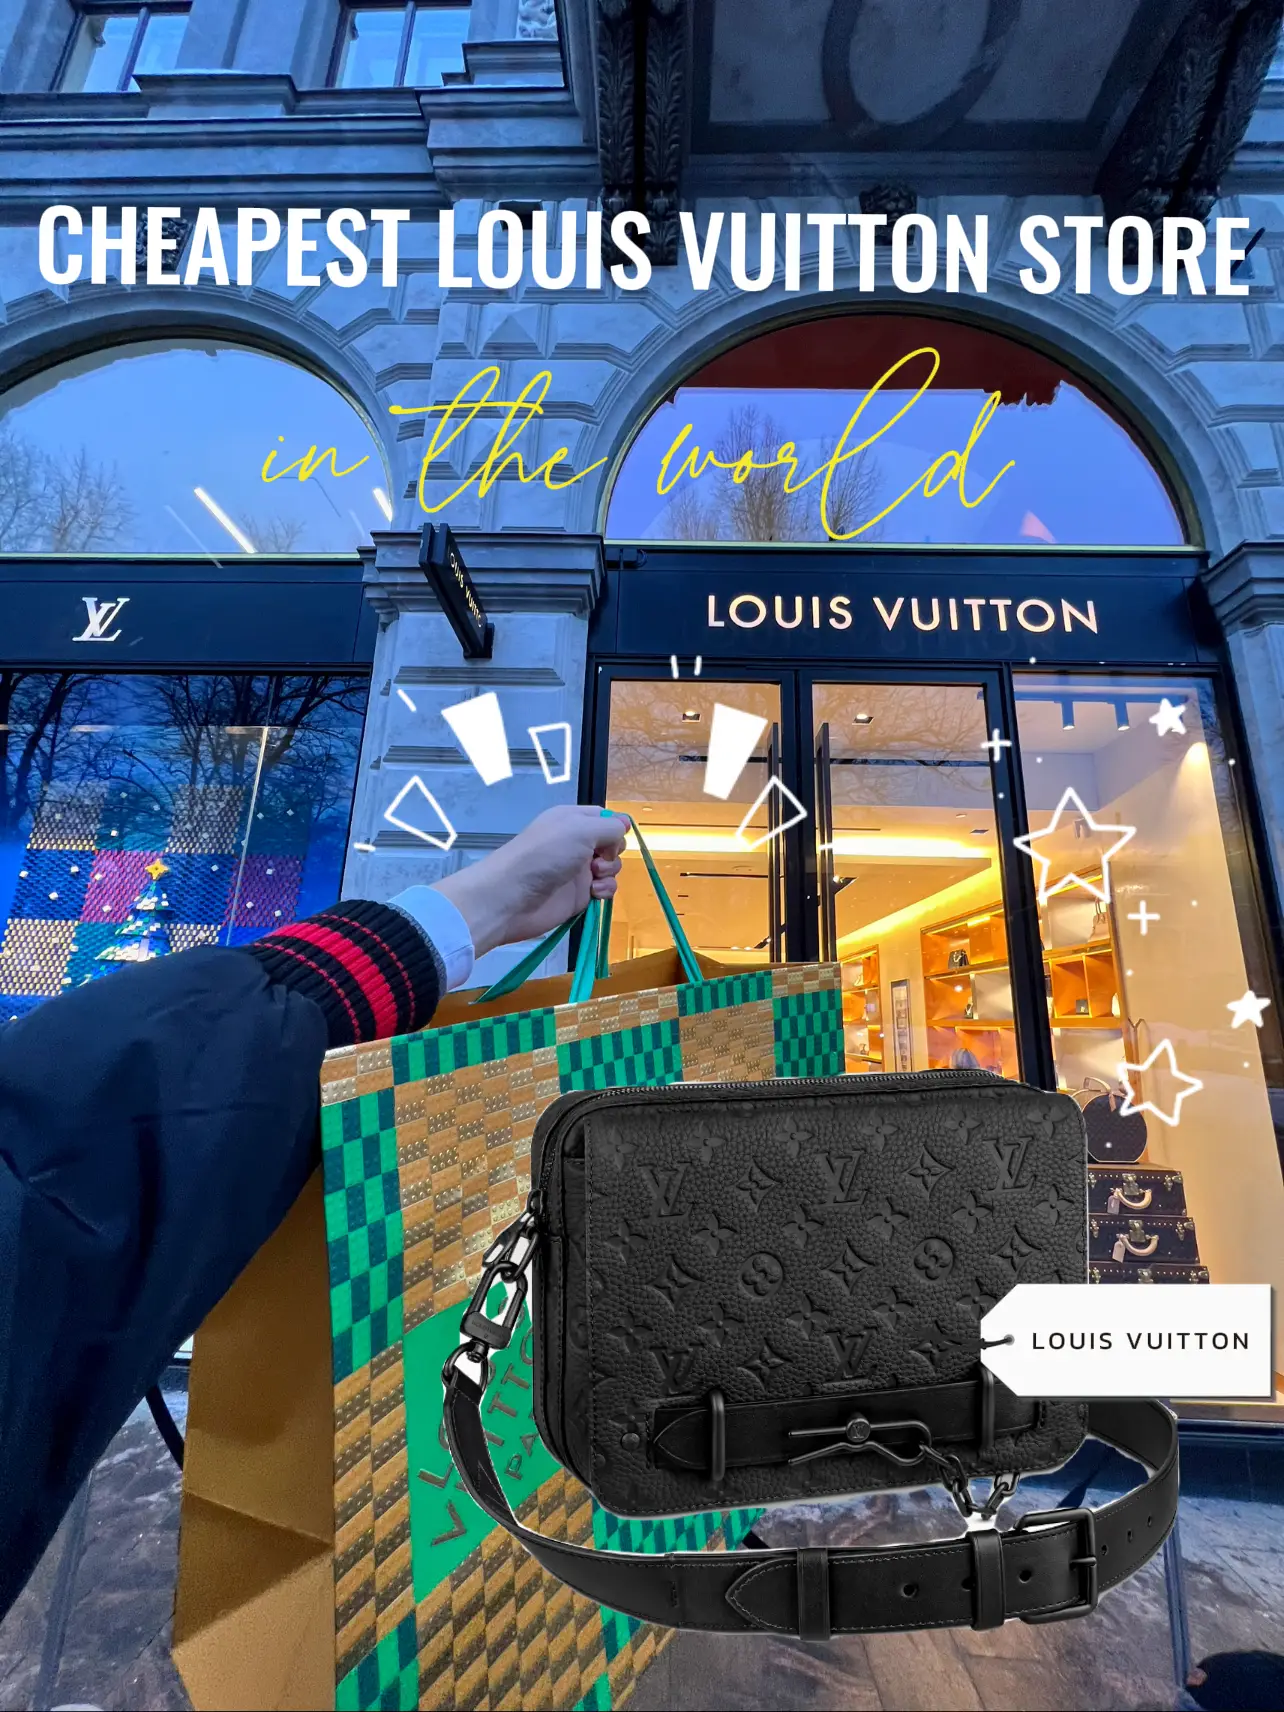 How much cheaper is Louis Vuitton in Paris compared to London